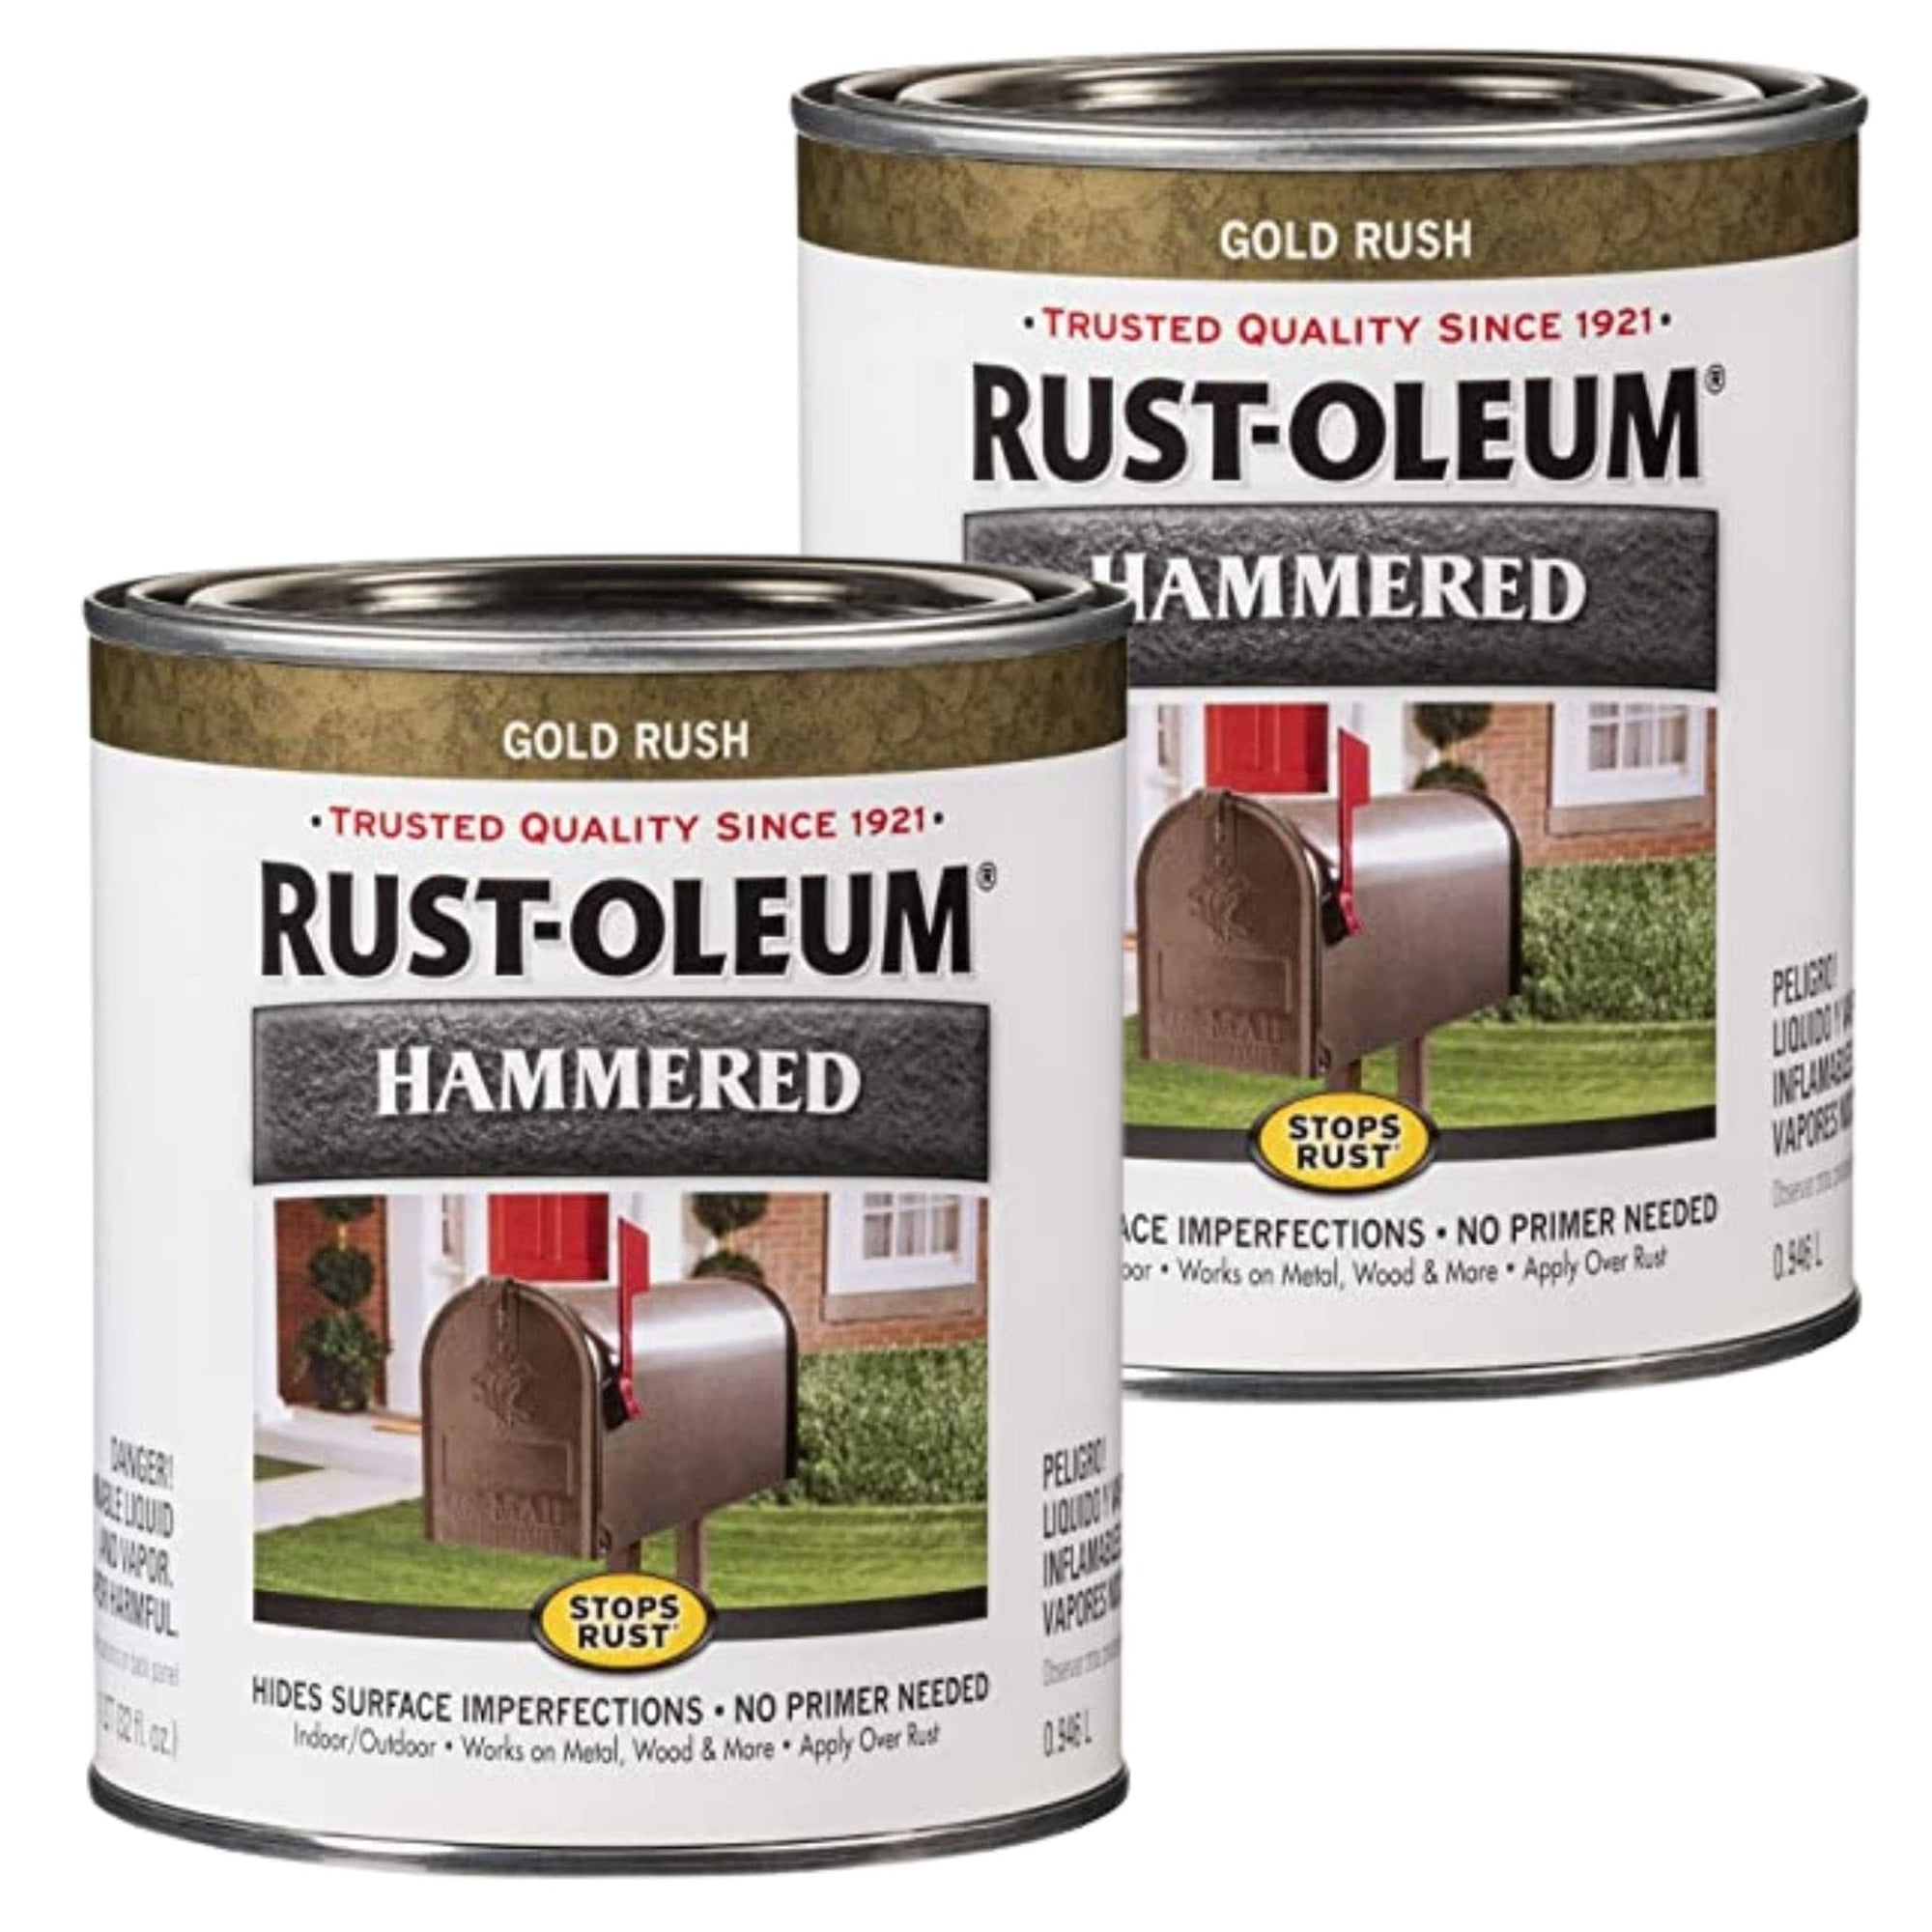 Rustoleum STOPS RUST AND RUST PREVENTION Hammered Brush-On Paint - 946ml (2 PACK) - GOLD RUSH - South East Clearance Centre